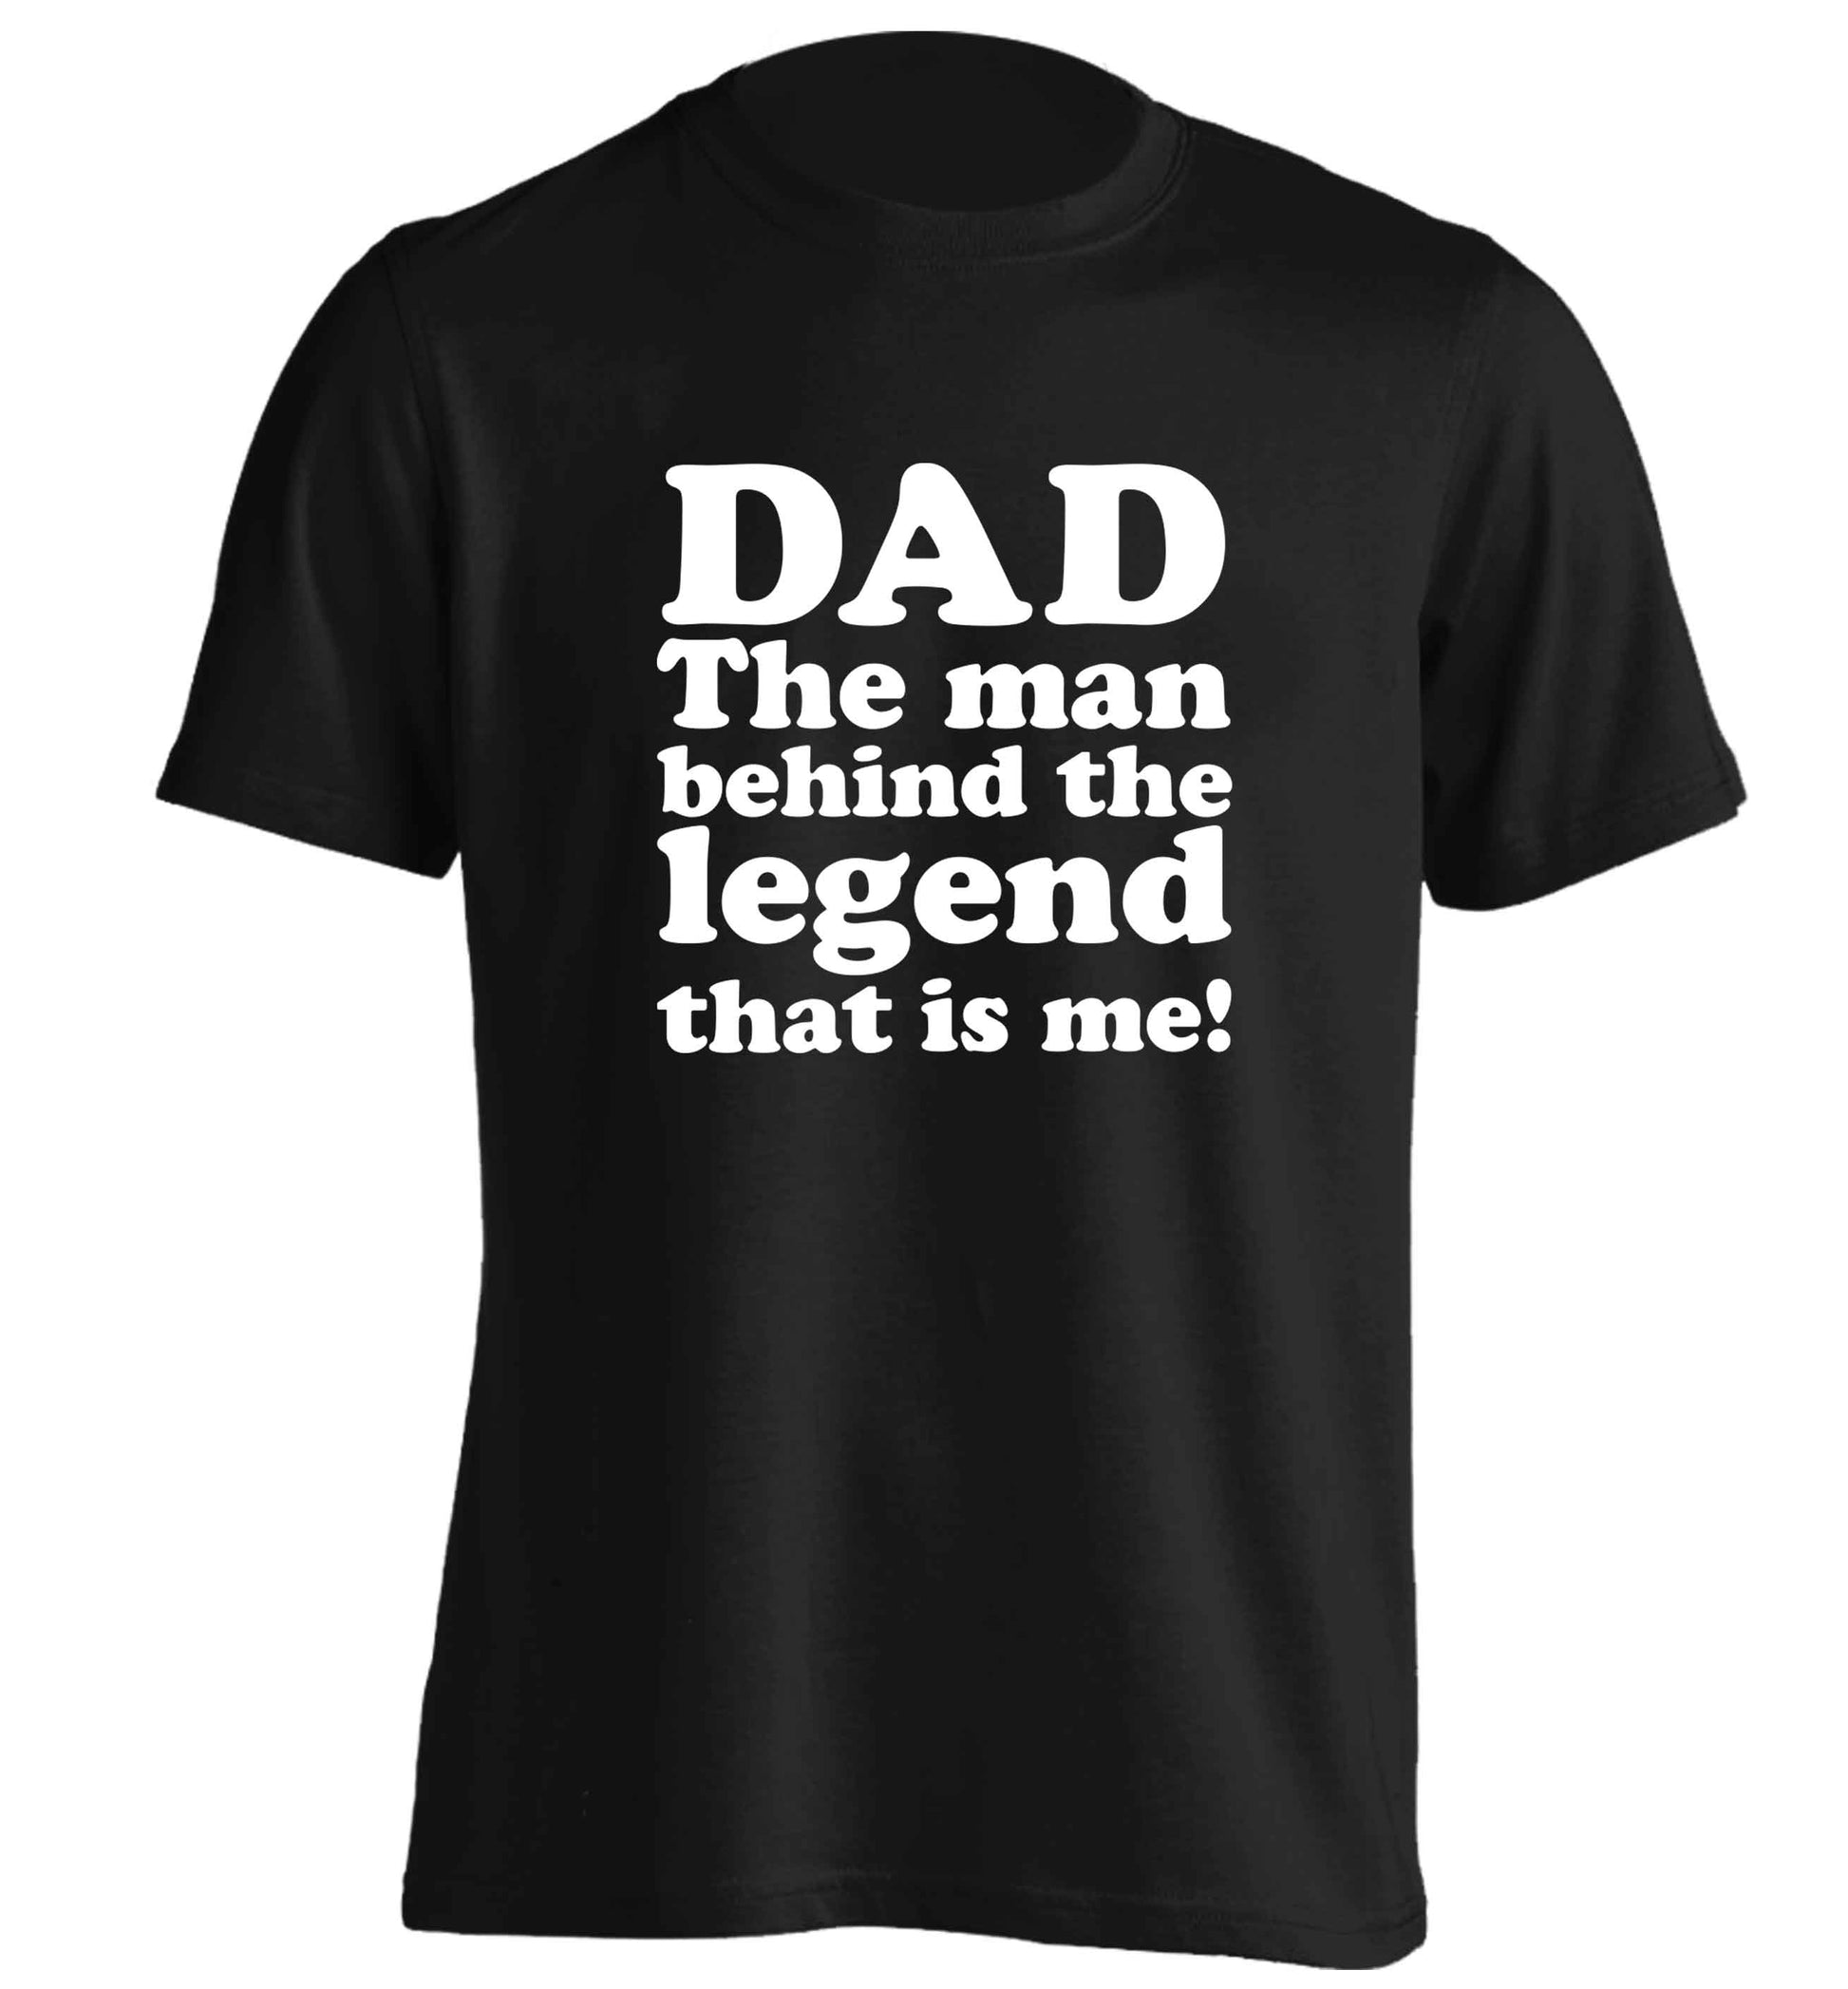 Dad the man behind the legend that is me adults unisex black Tshirt 2XL